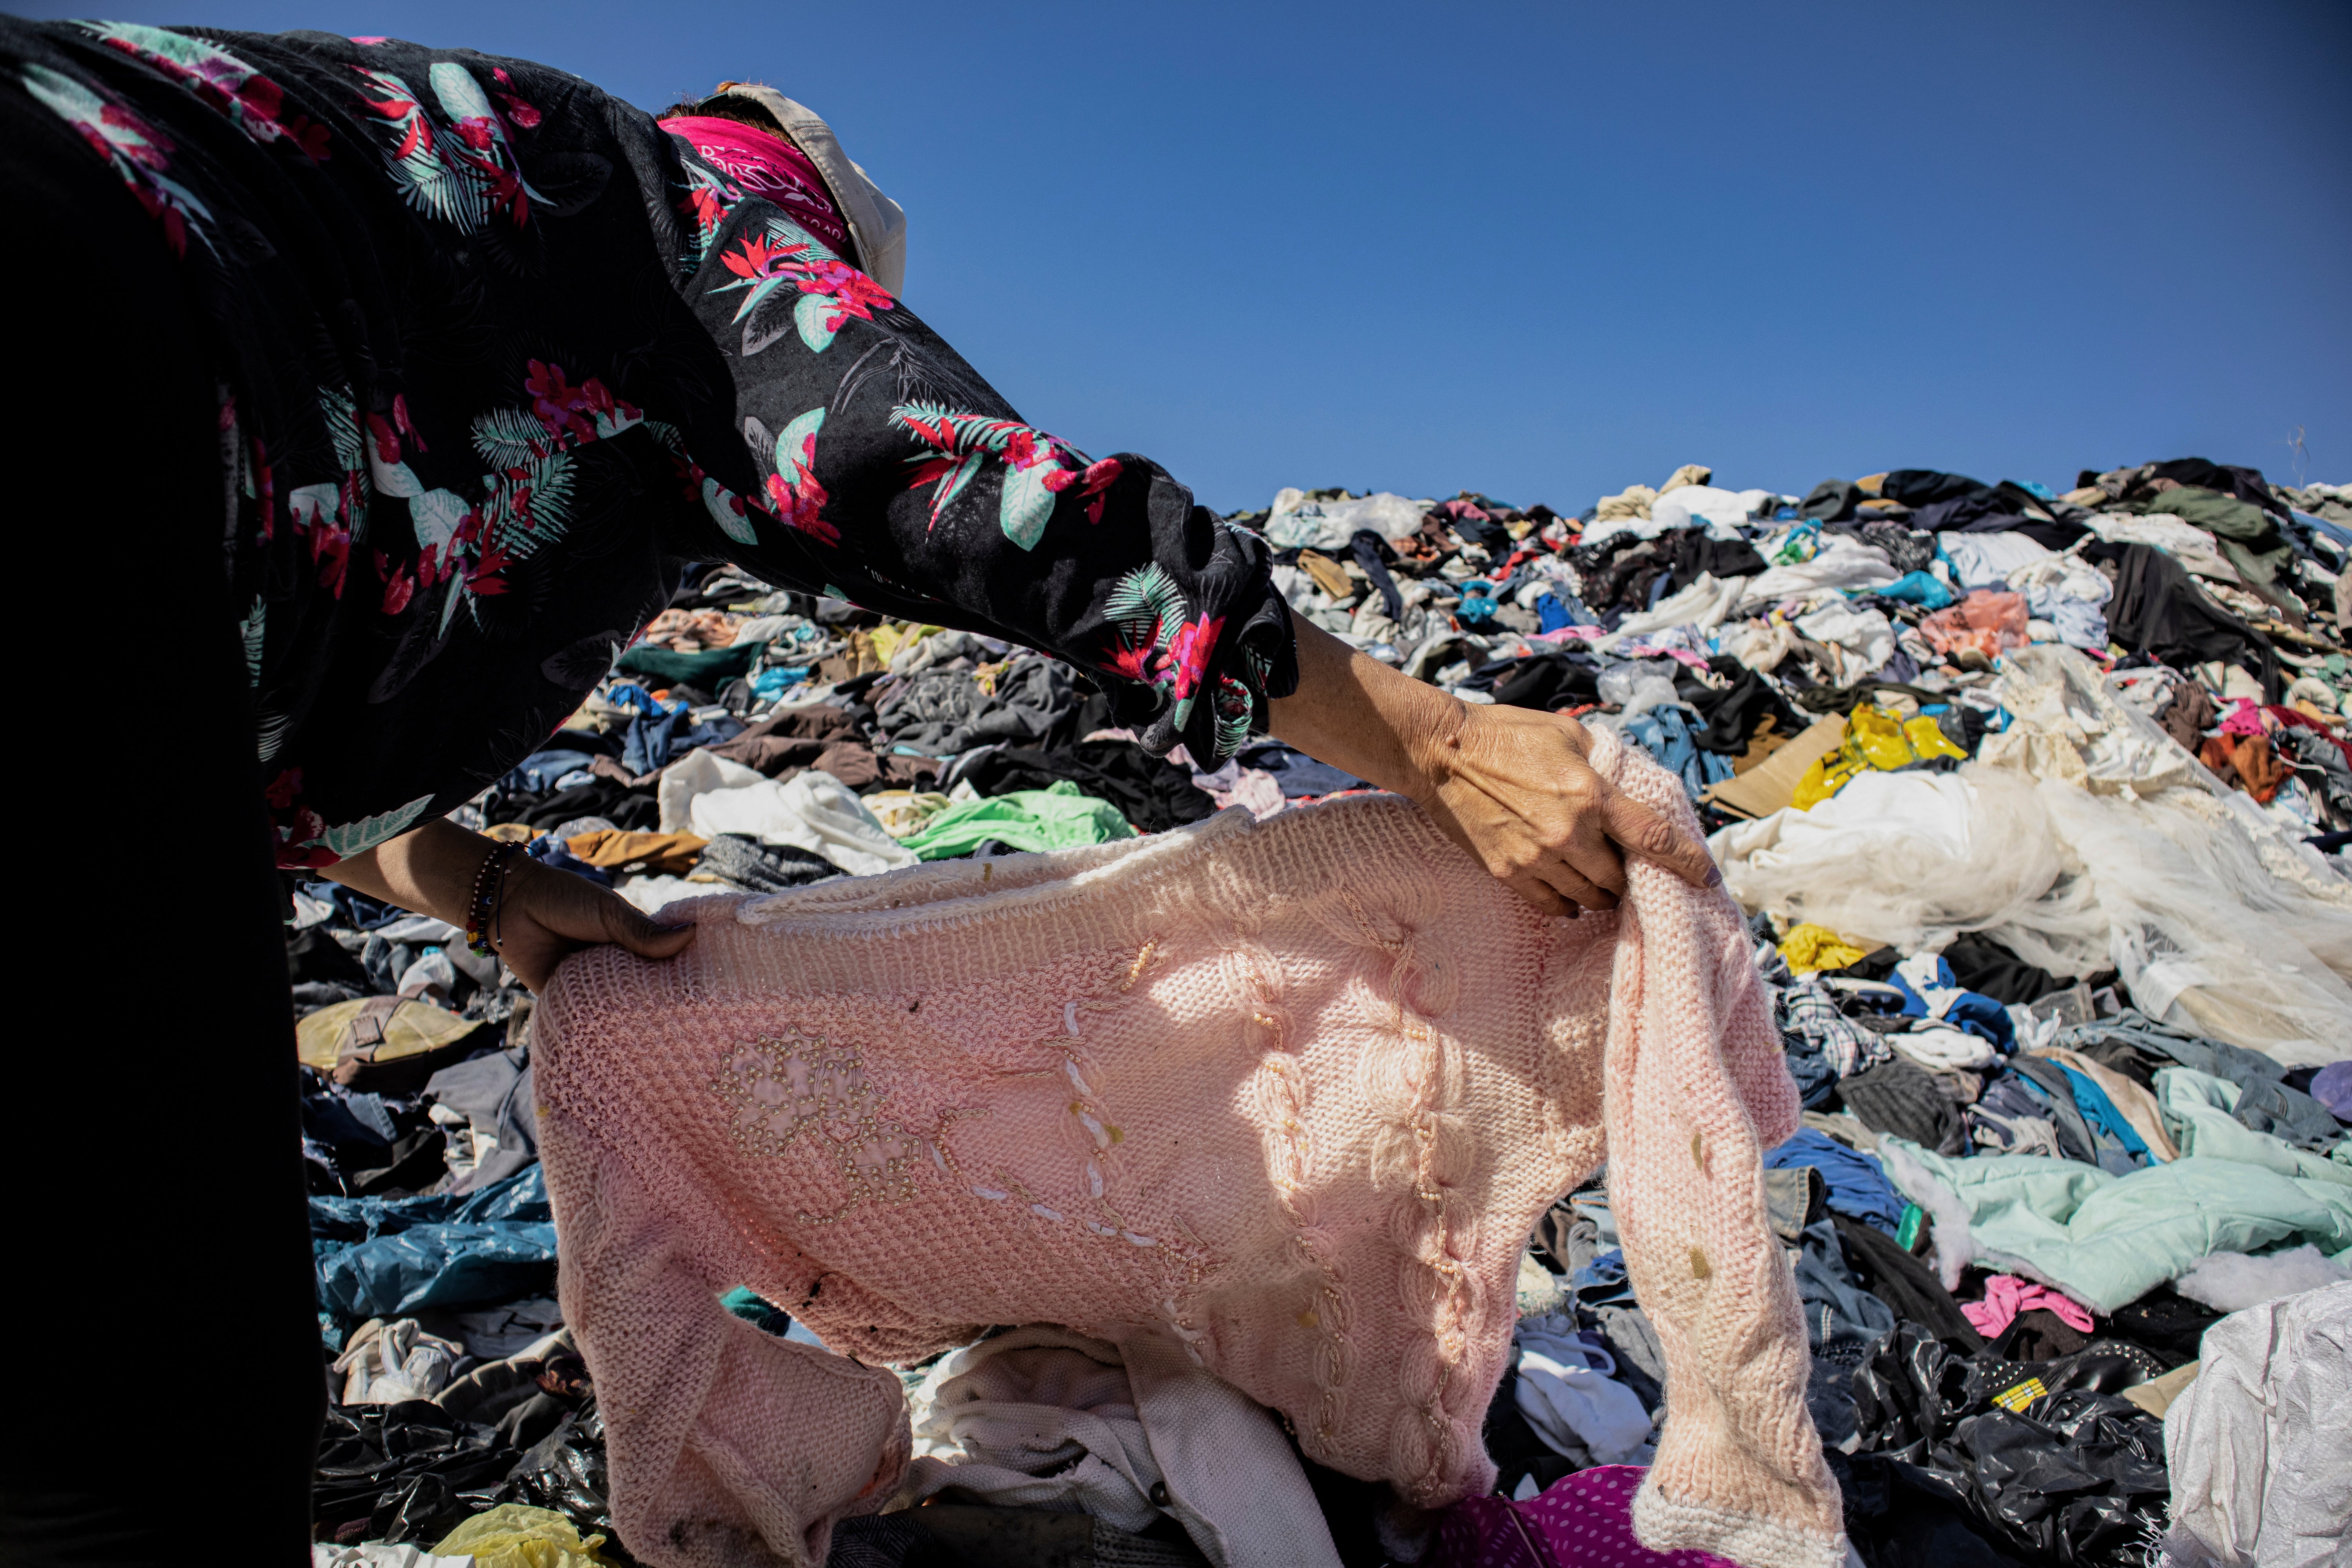 A person searches for clothing in a pile of discarded garments in the Atacama Desert.  (Photo: Antonio Cossio, AP)